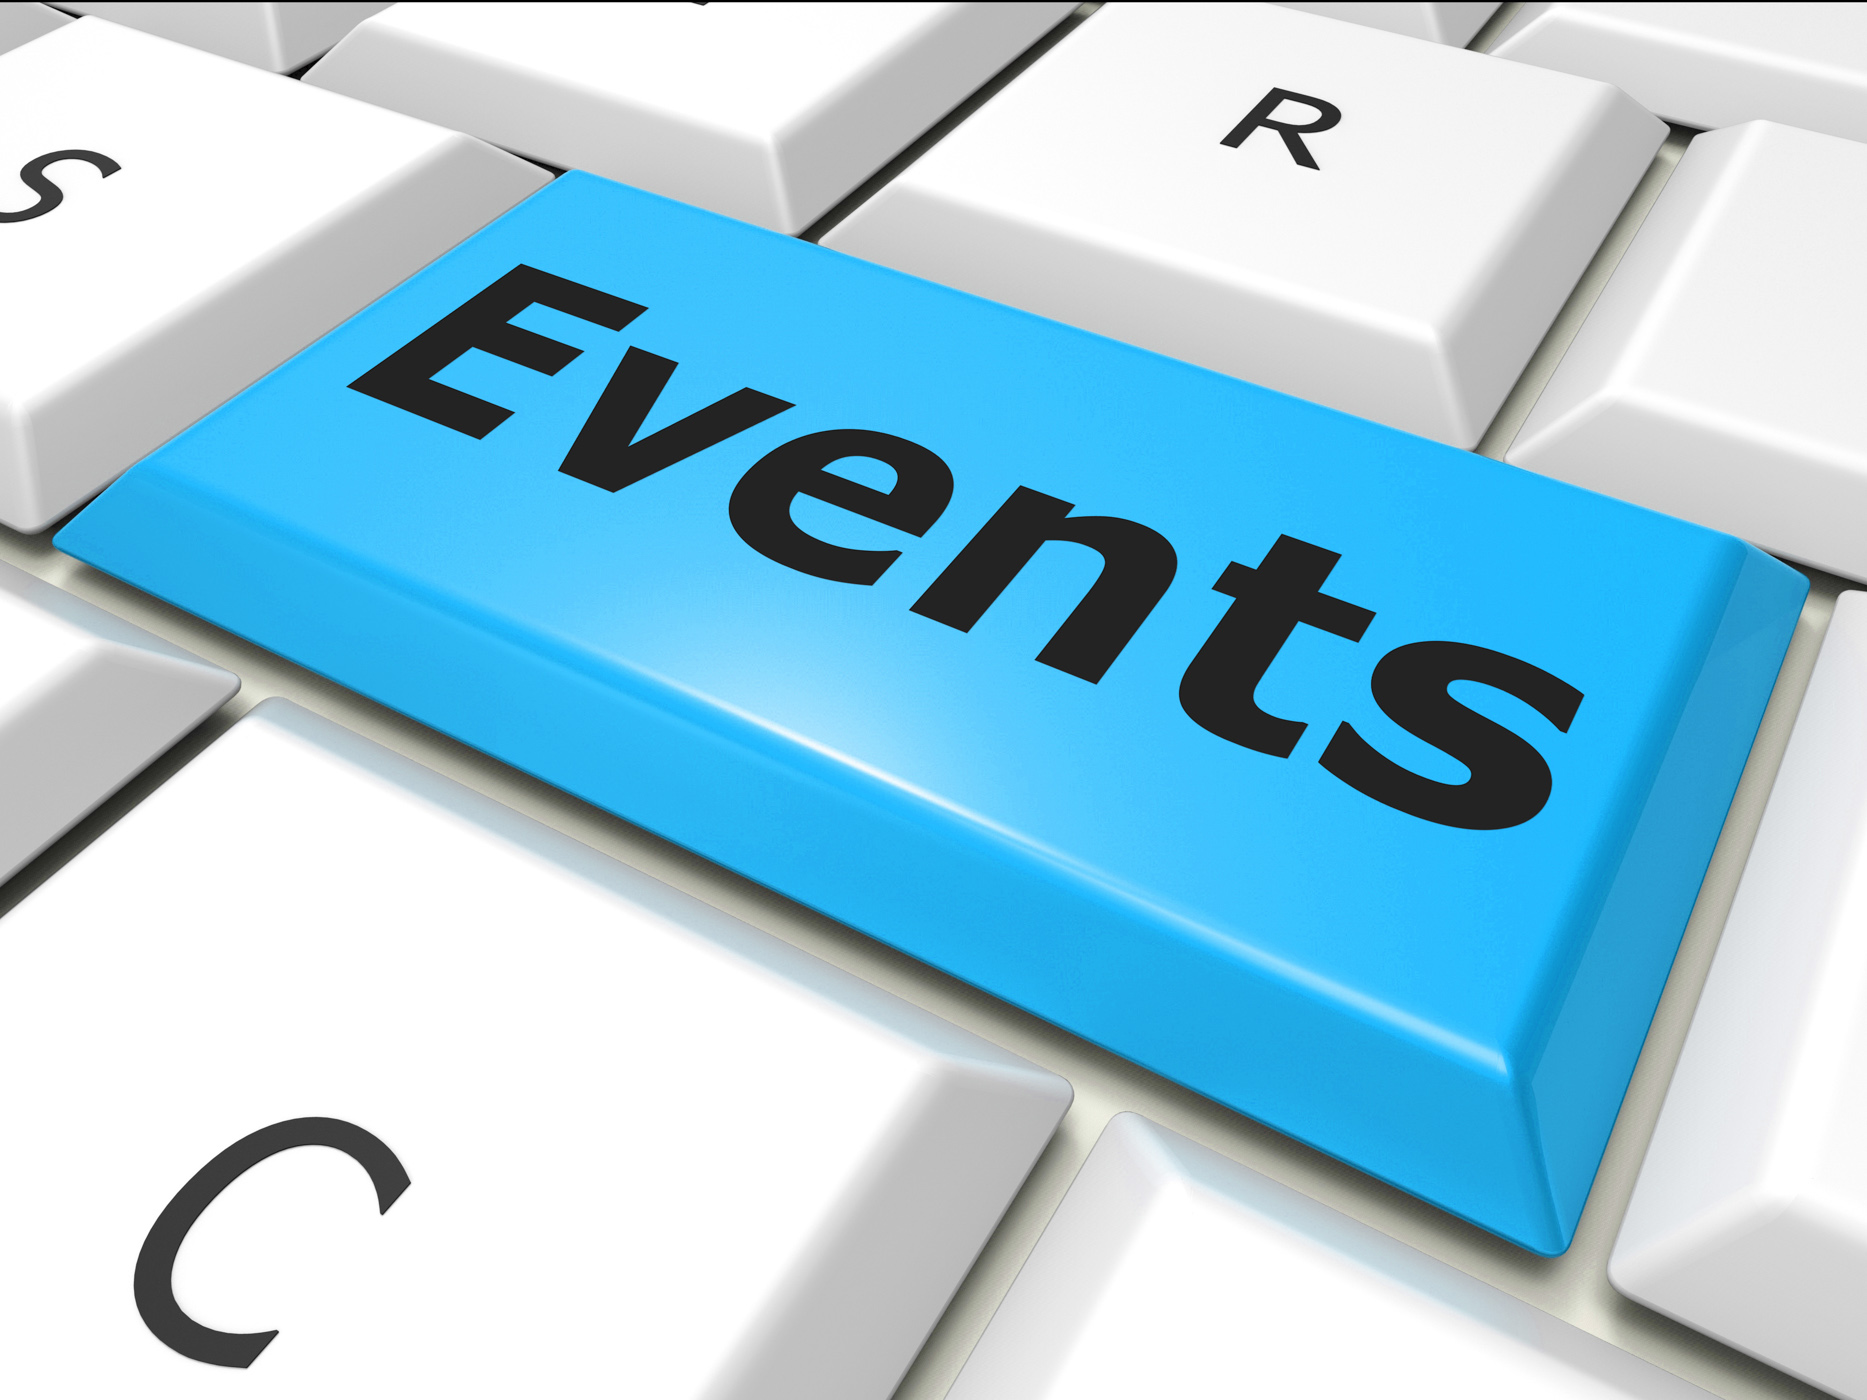 Events www indicates world wide web and happening photo